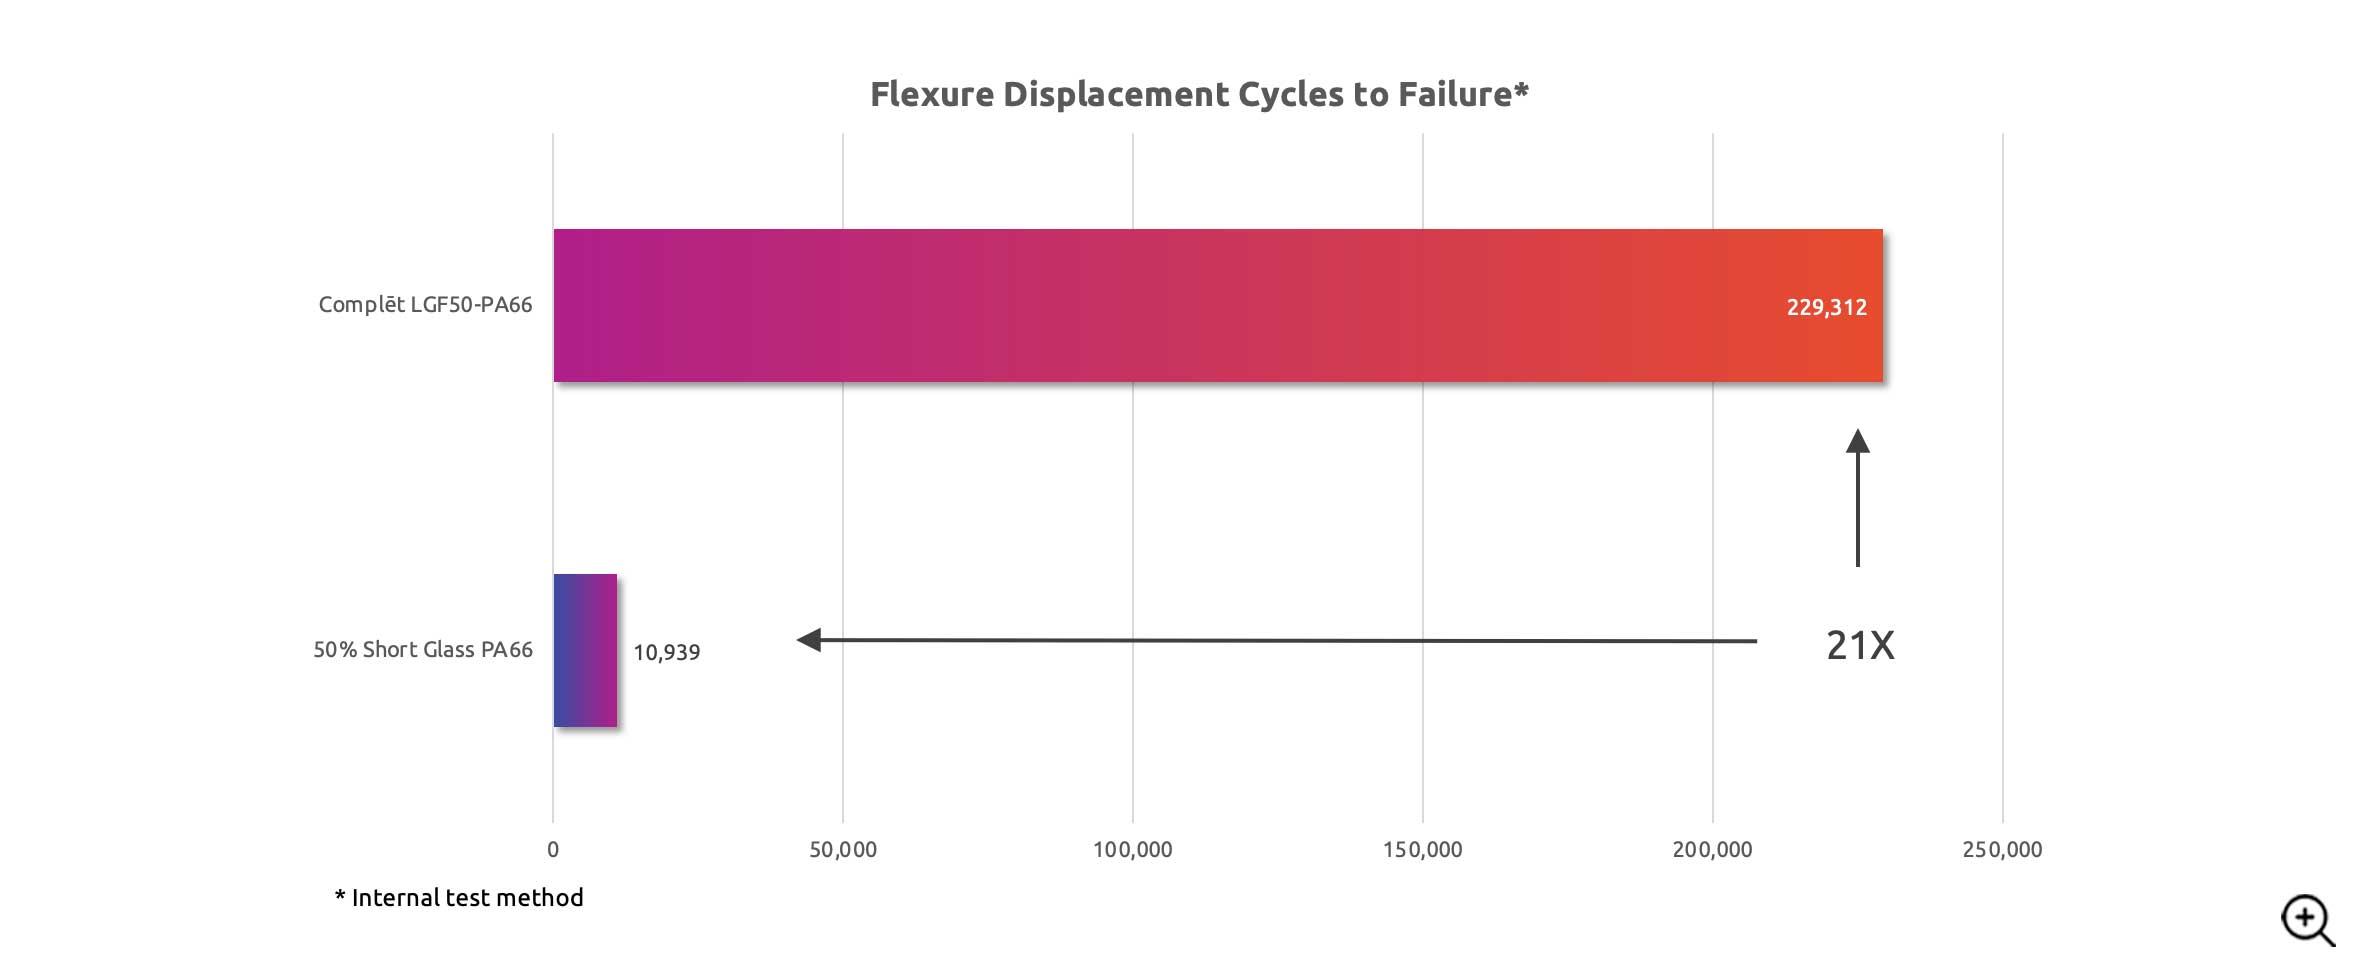 Flexure Displacement Cycles to Failure